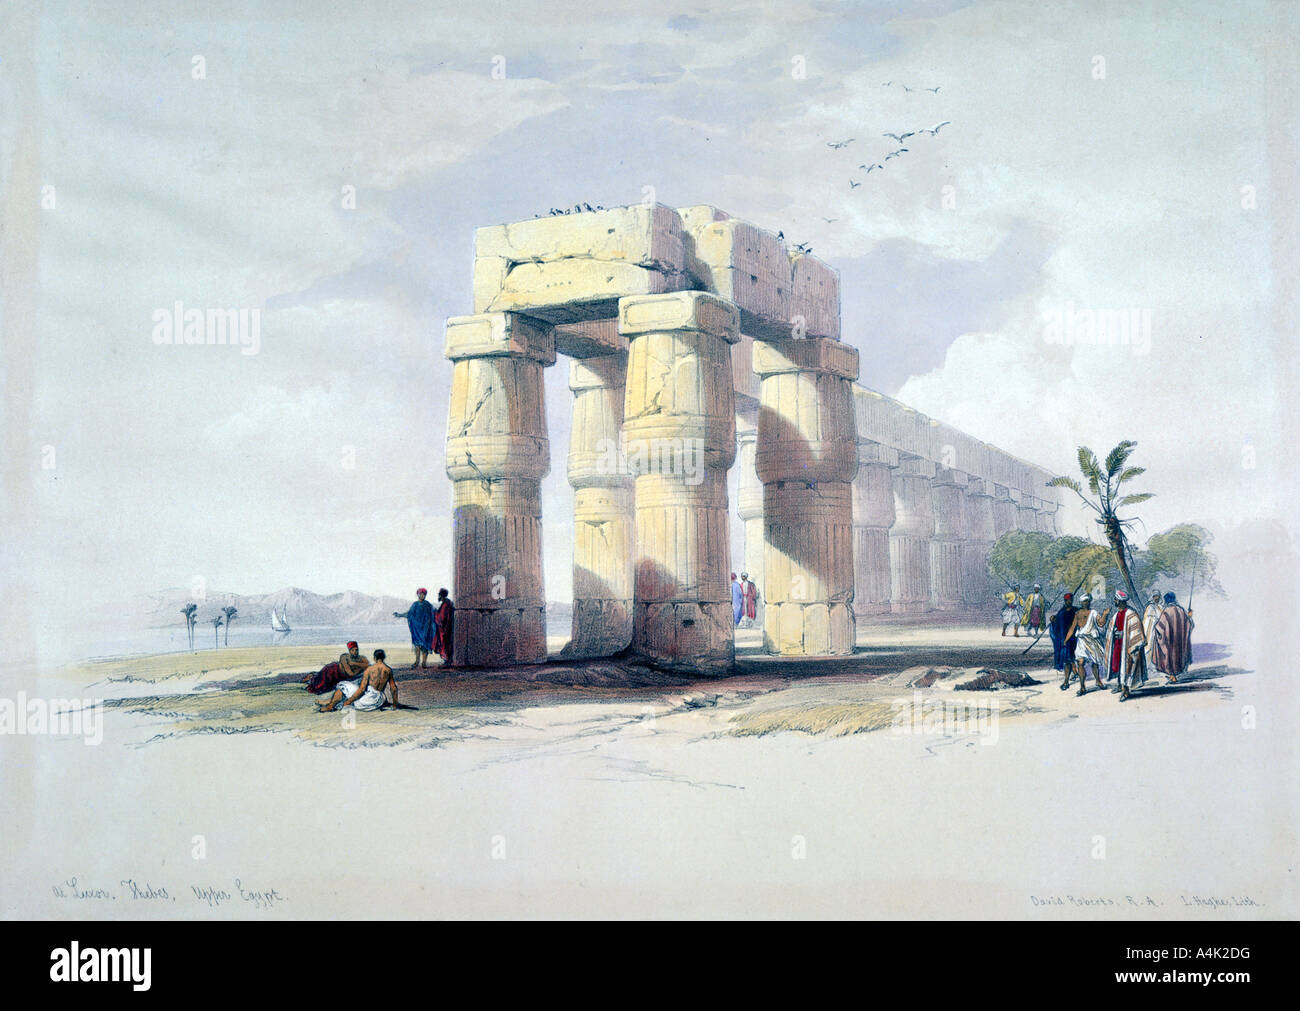 'At Luxor, Thebes, Upper Egypt', 19th century. Artist: Louis Haghe Stock Photo